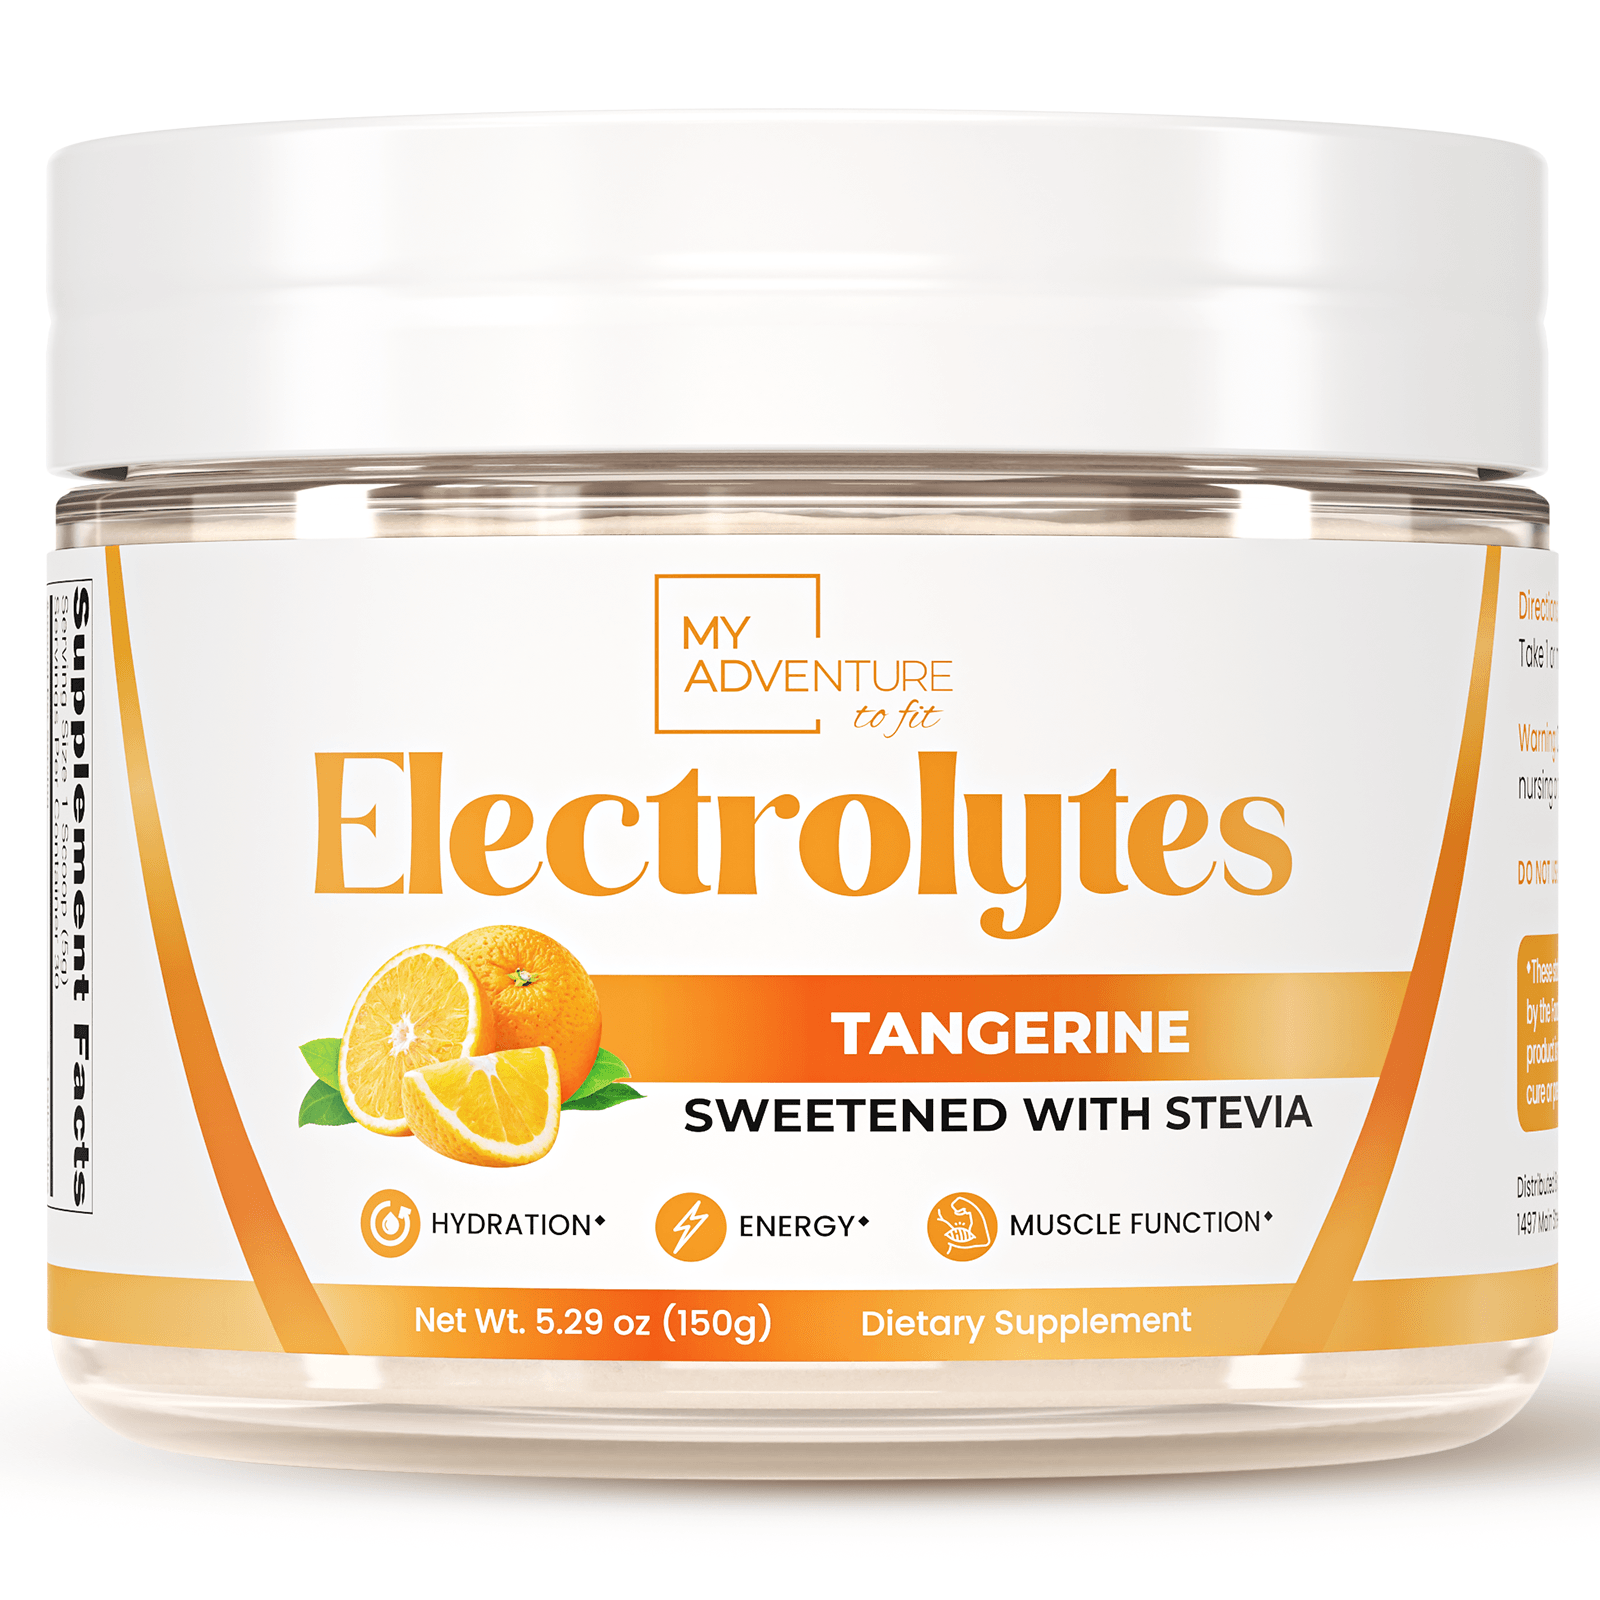 Electrolytes- Tangerine - My Adventure to Fit